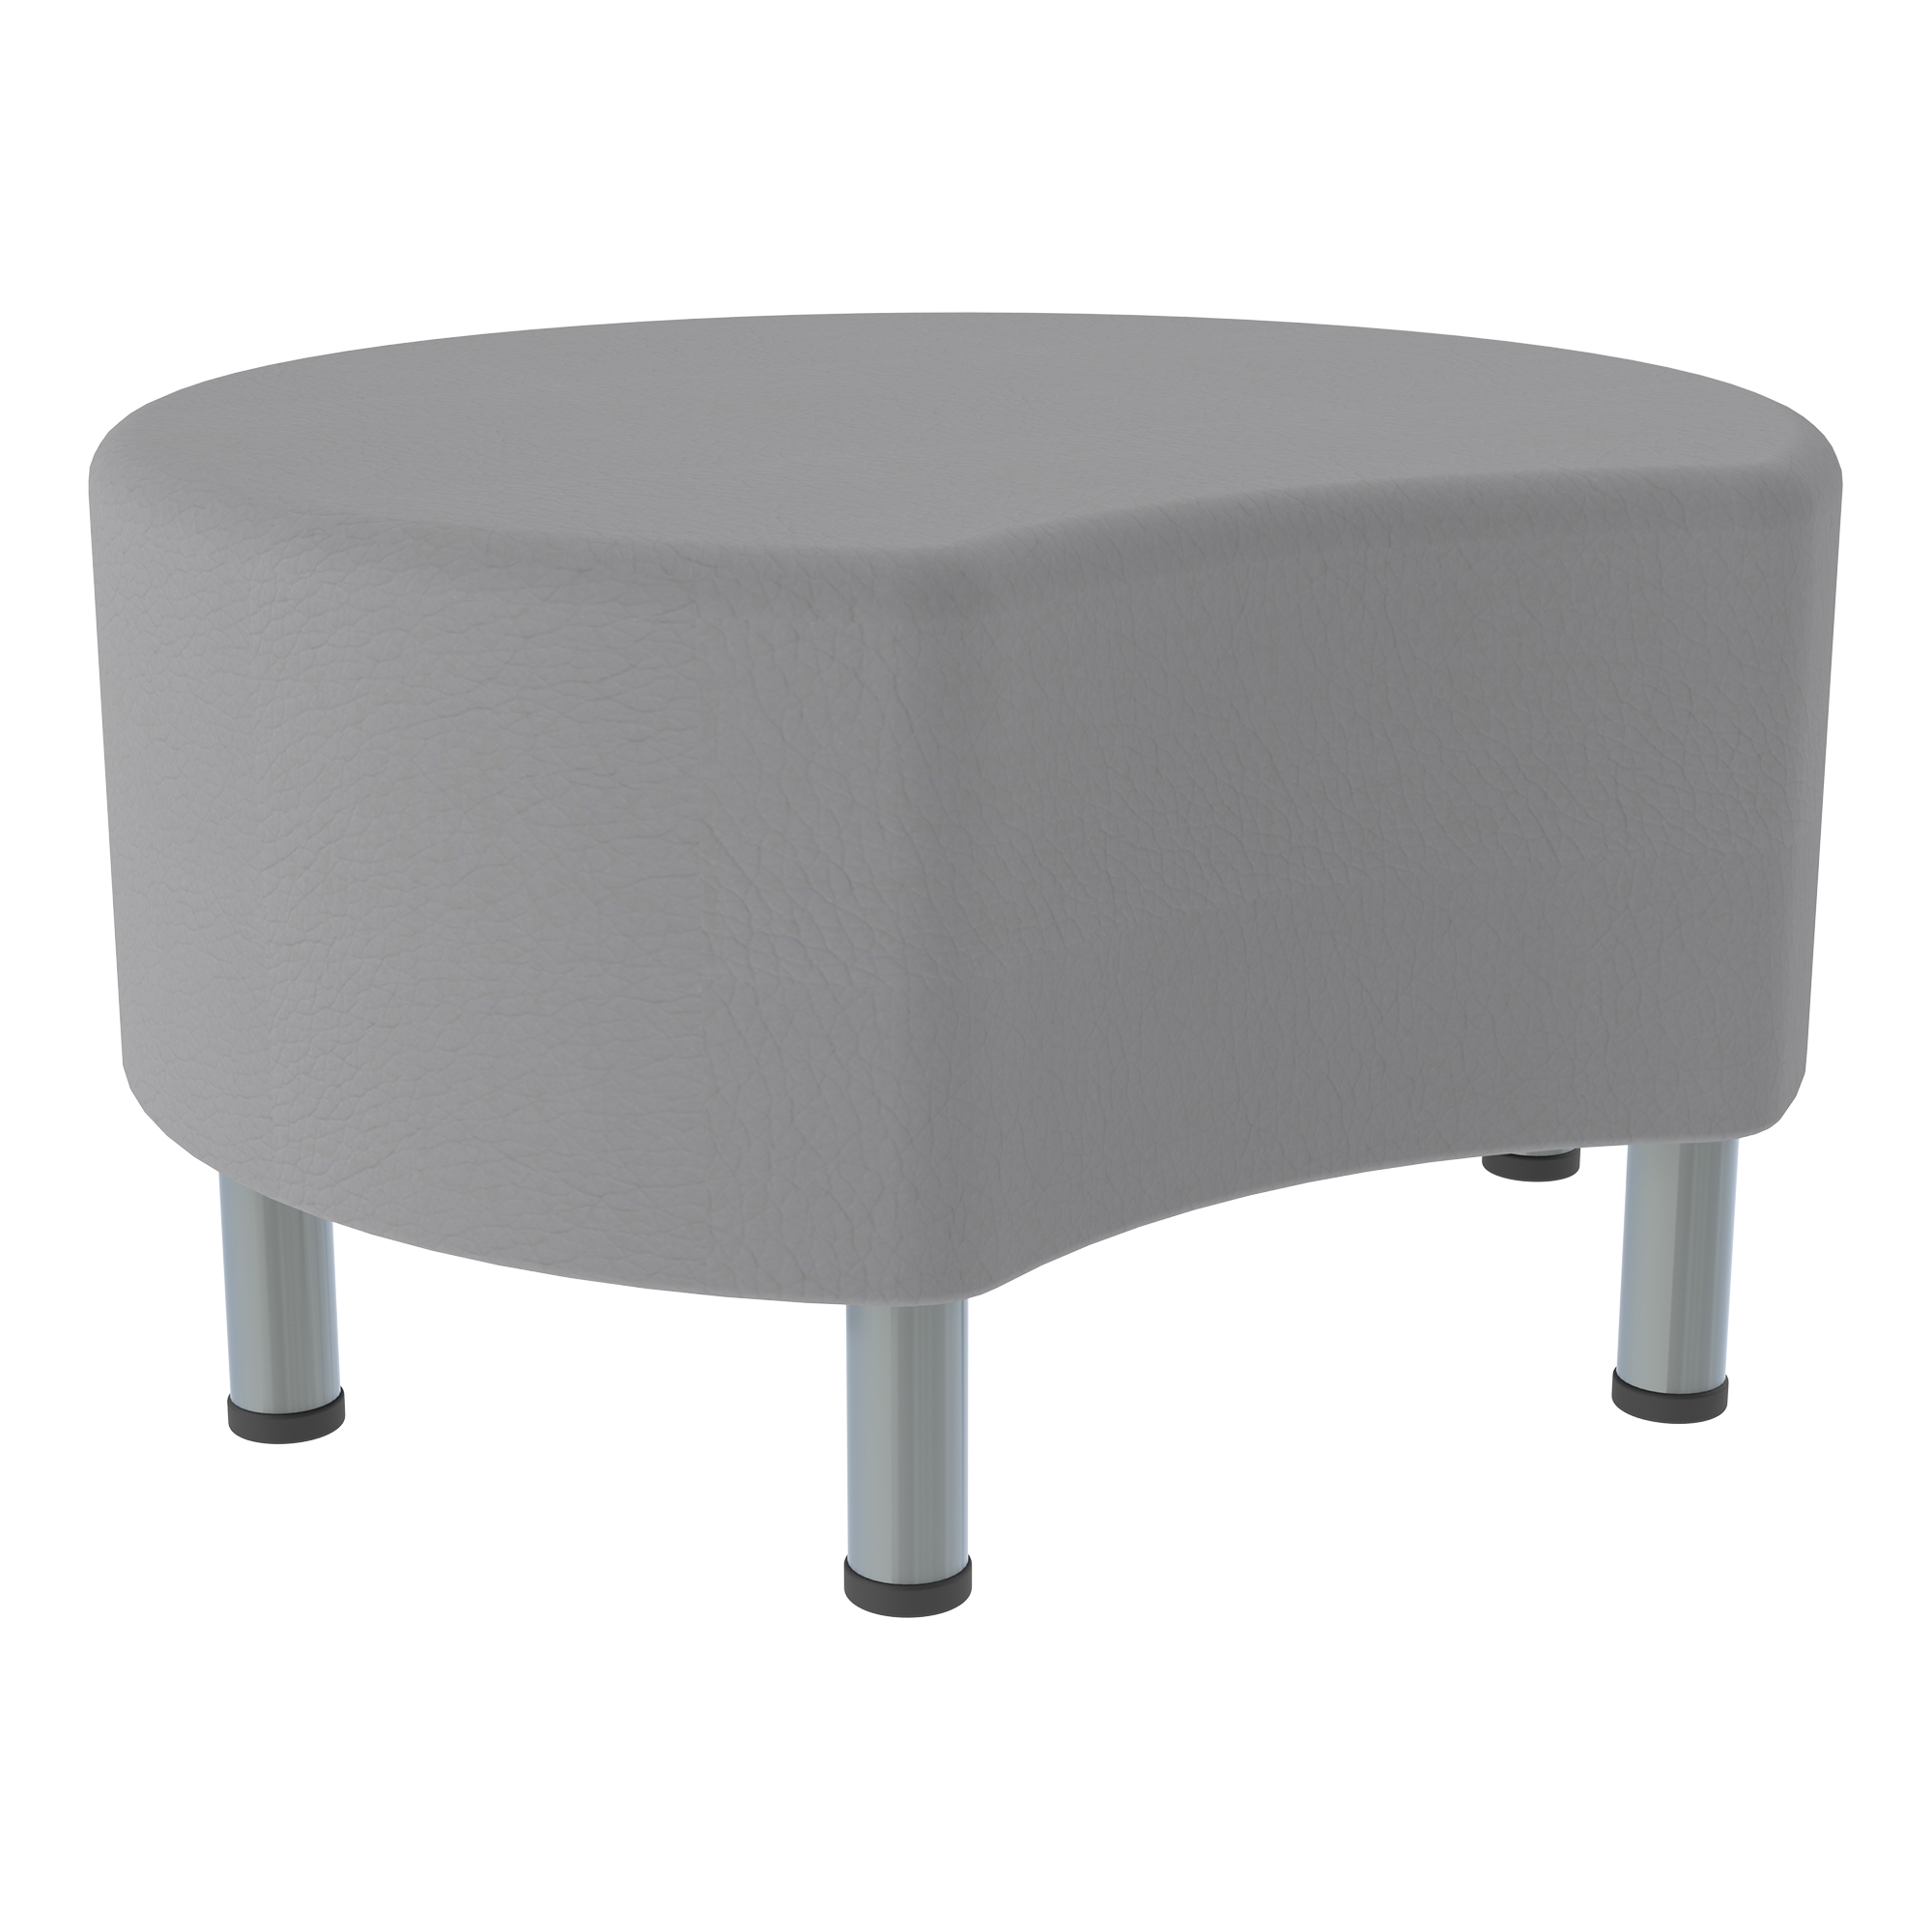 Learniture Learniture 12 Petal Soft Seating 